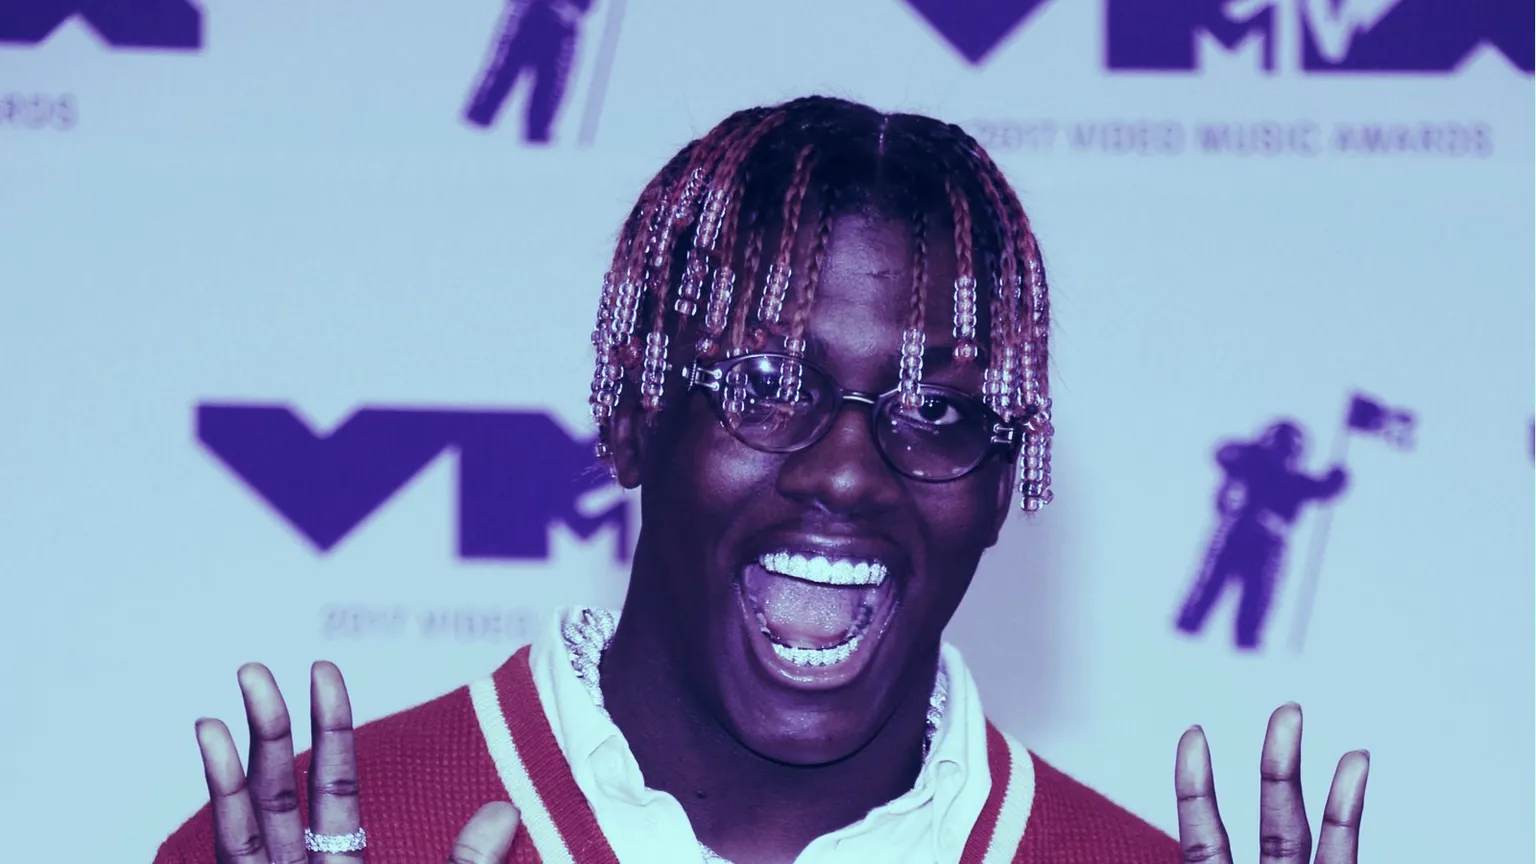 Lil Yachty at the 2017 MTV Video Music Awards. Image: Shutterstock